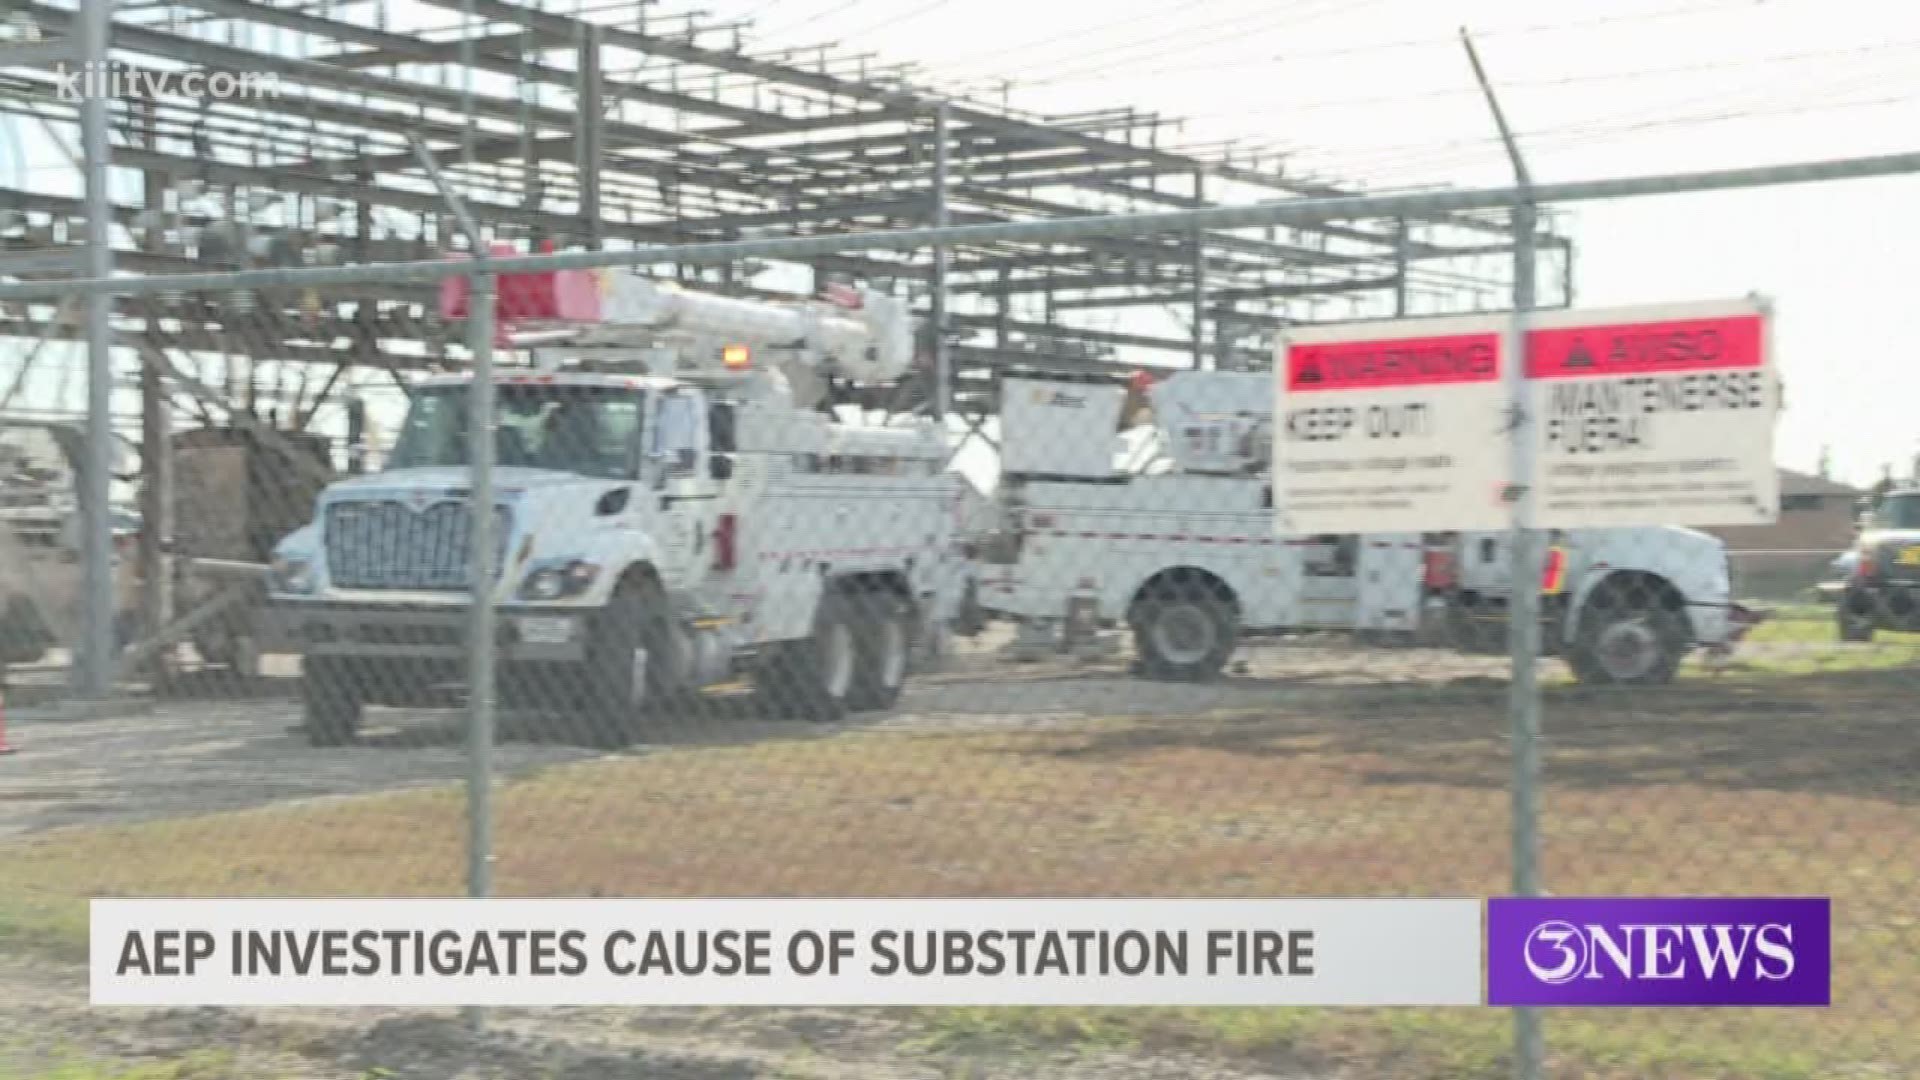 Crews with American Electric Power Texas worked throughout the night to restore power to customers in Corpus Christi's southside after a fire broke out Wednesday at their substation near Yorktown and Cimarron.